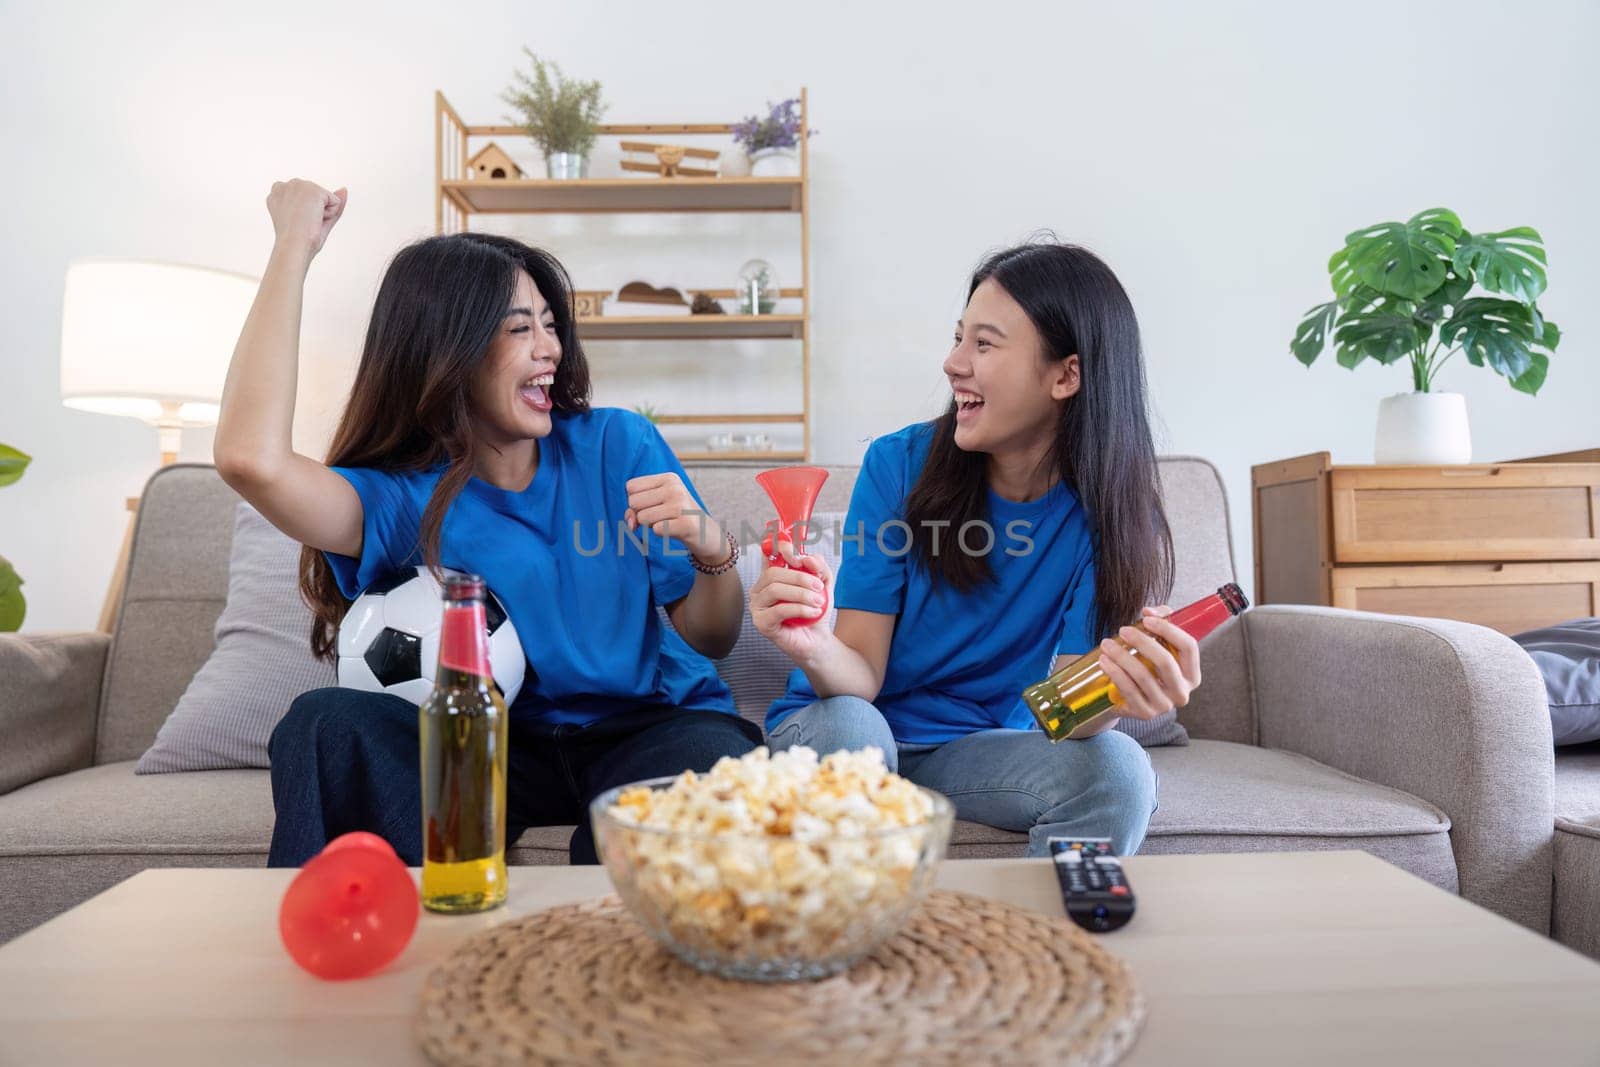 Lesbian couple cheering while watching Euro football match at home with drinks and popcorn. Concept of LGBTQ pride, sports enthusiasm, and celebration.